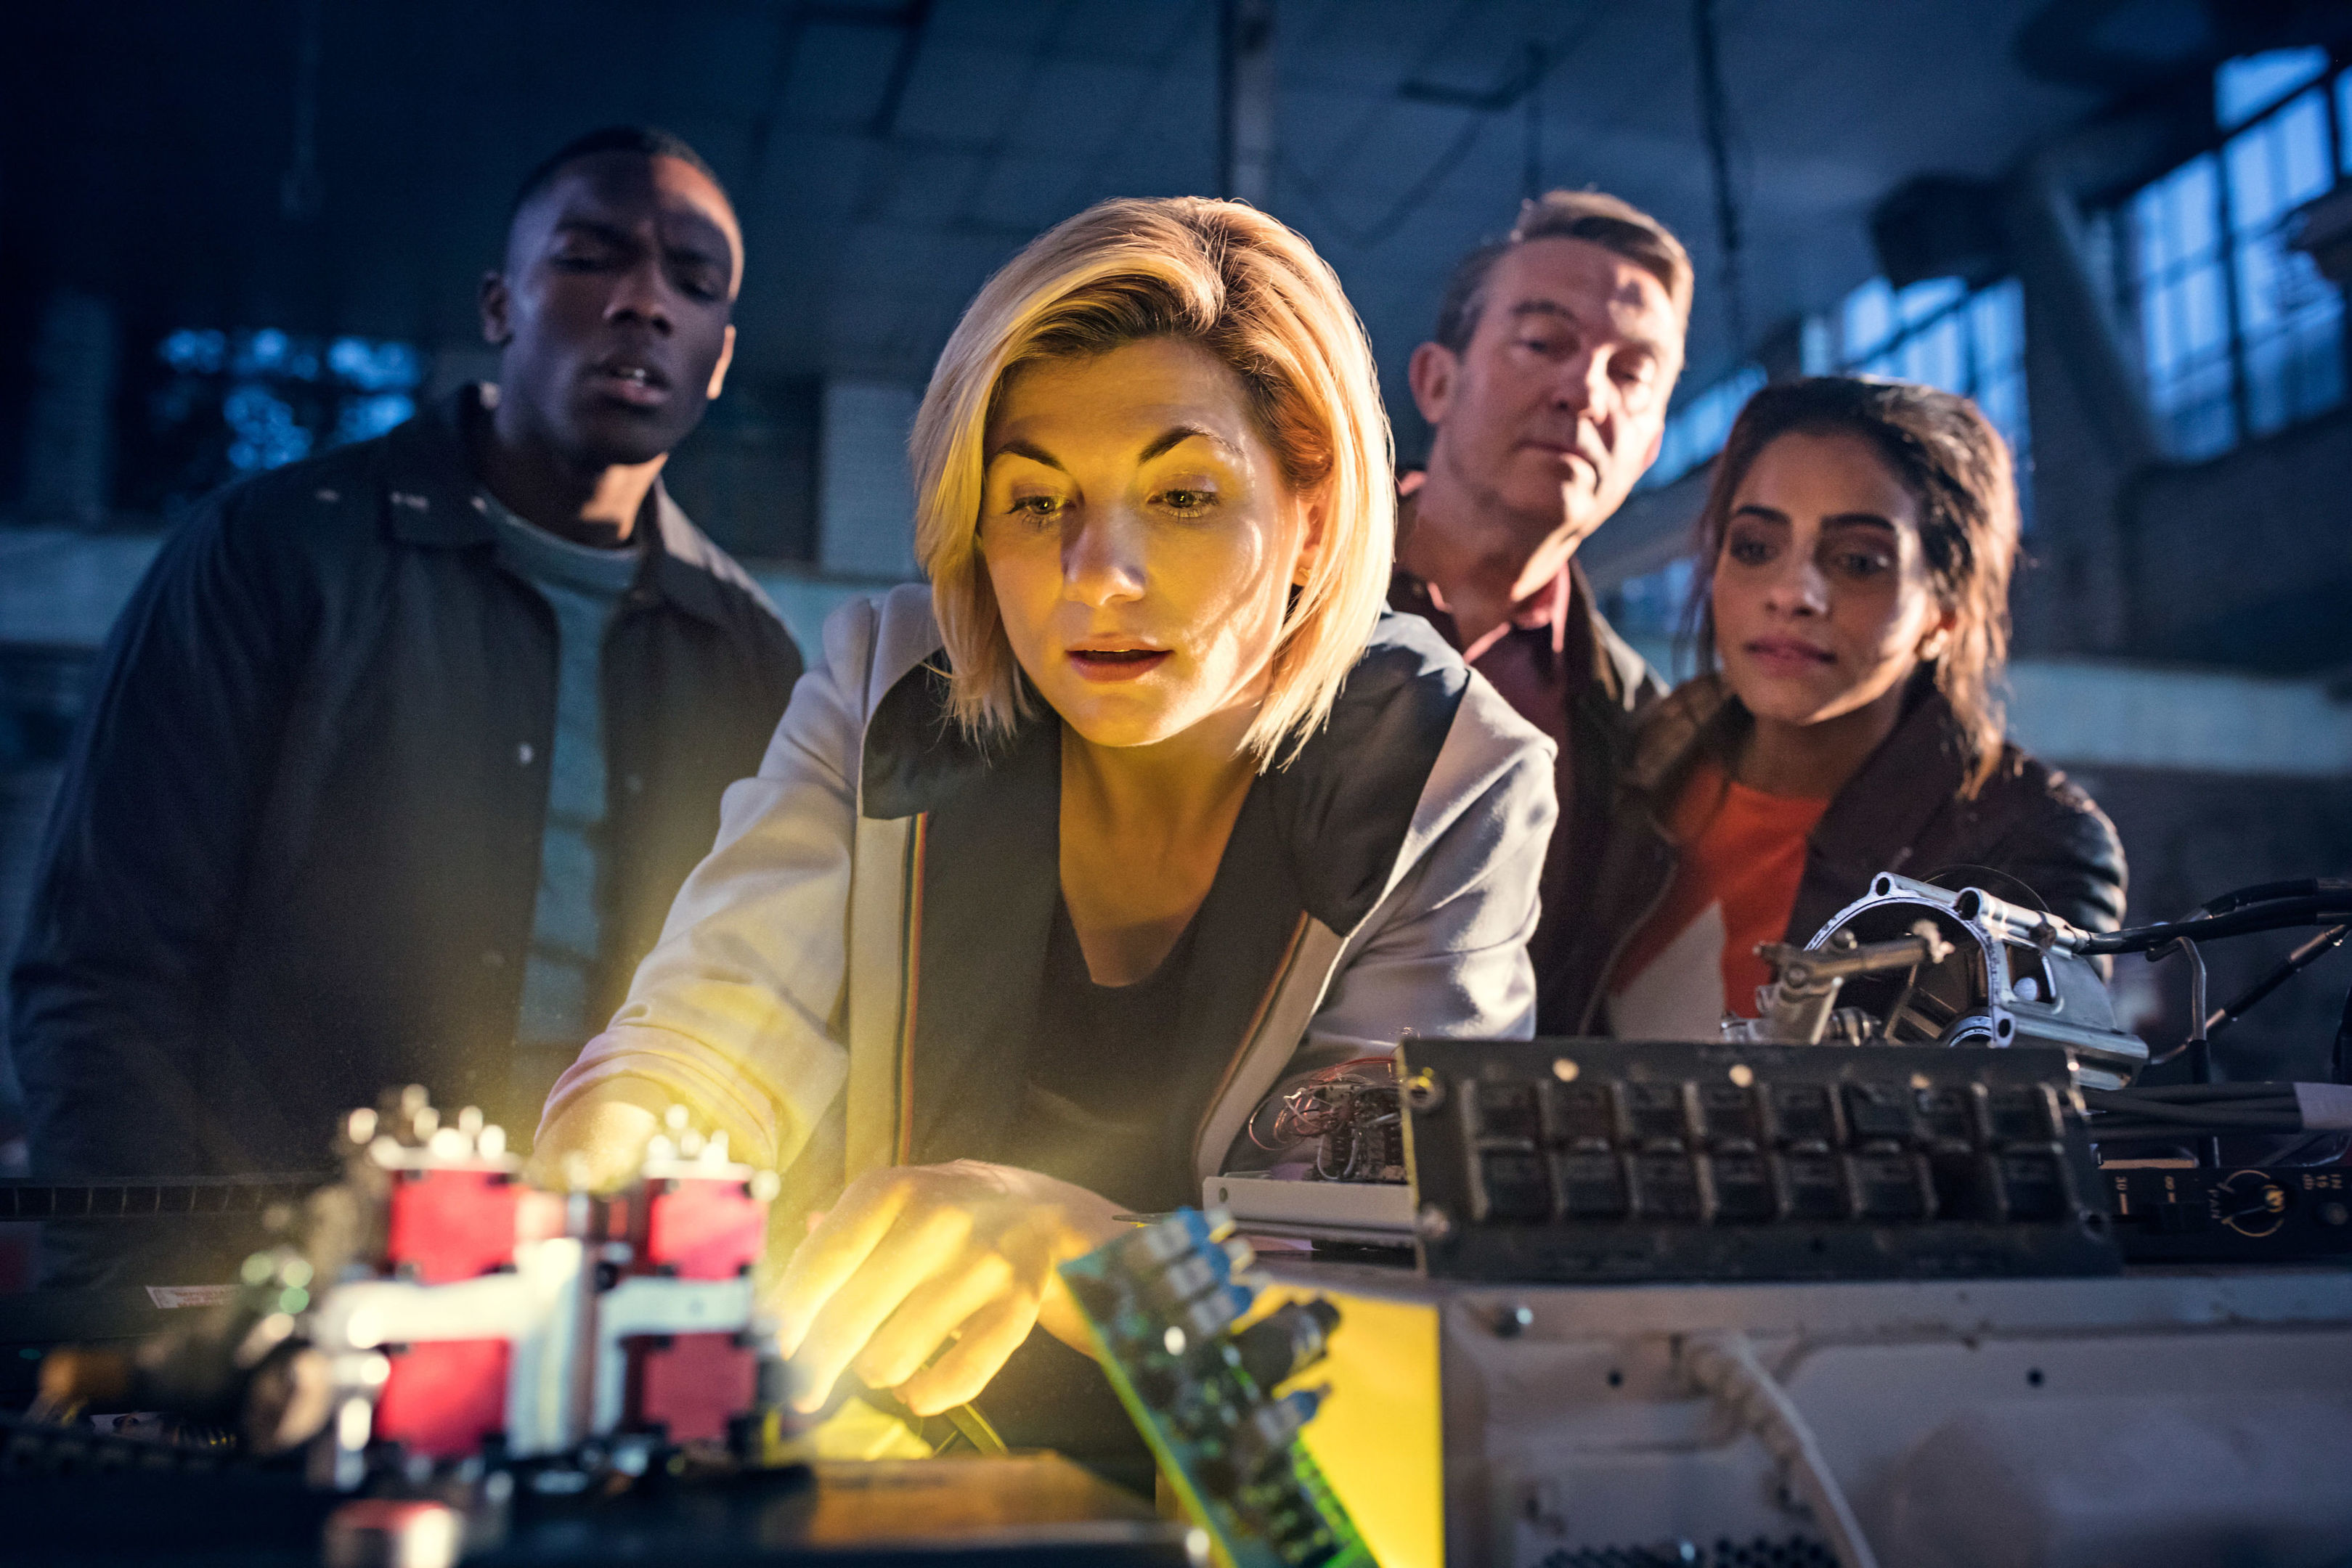 Jodie Whittaker as The Doctor (centre), Bradley Walsh as Graham (second right) and Mandip Gill as Yaz (first right) (Sophie Mutevelian/PA Wire)